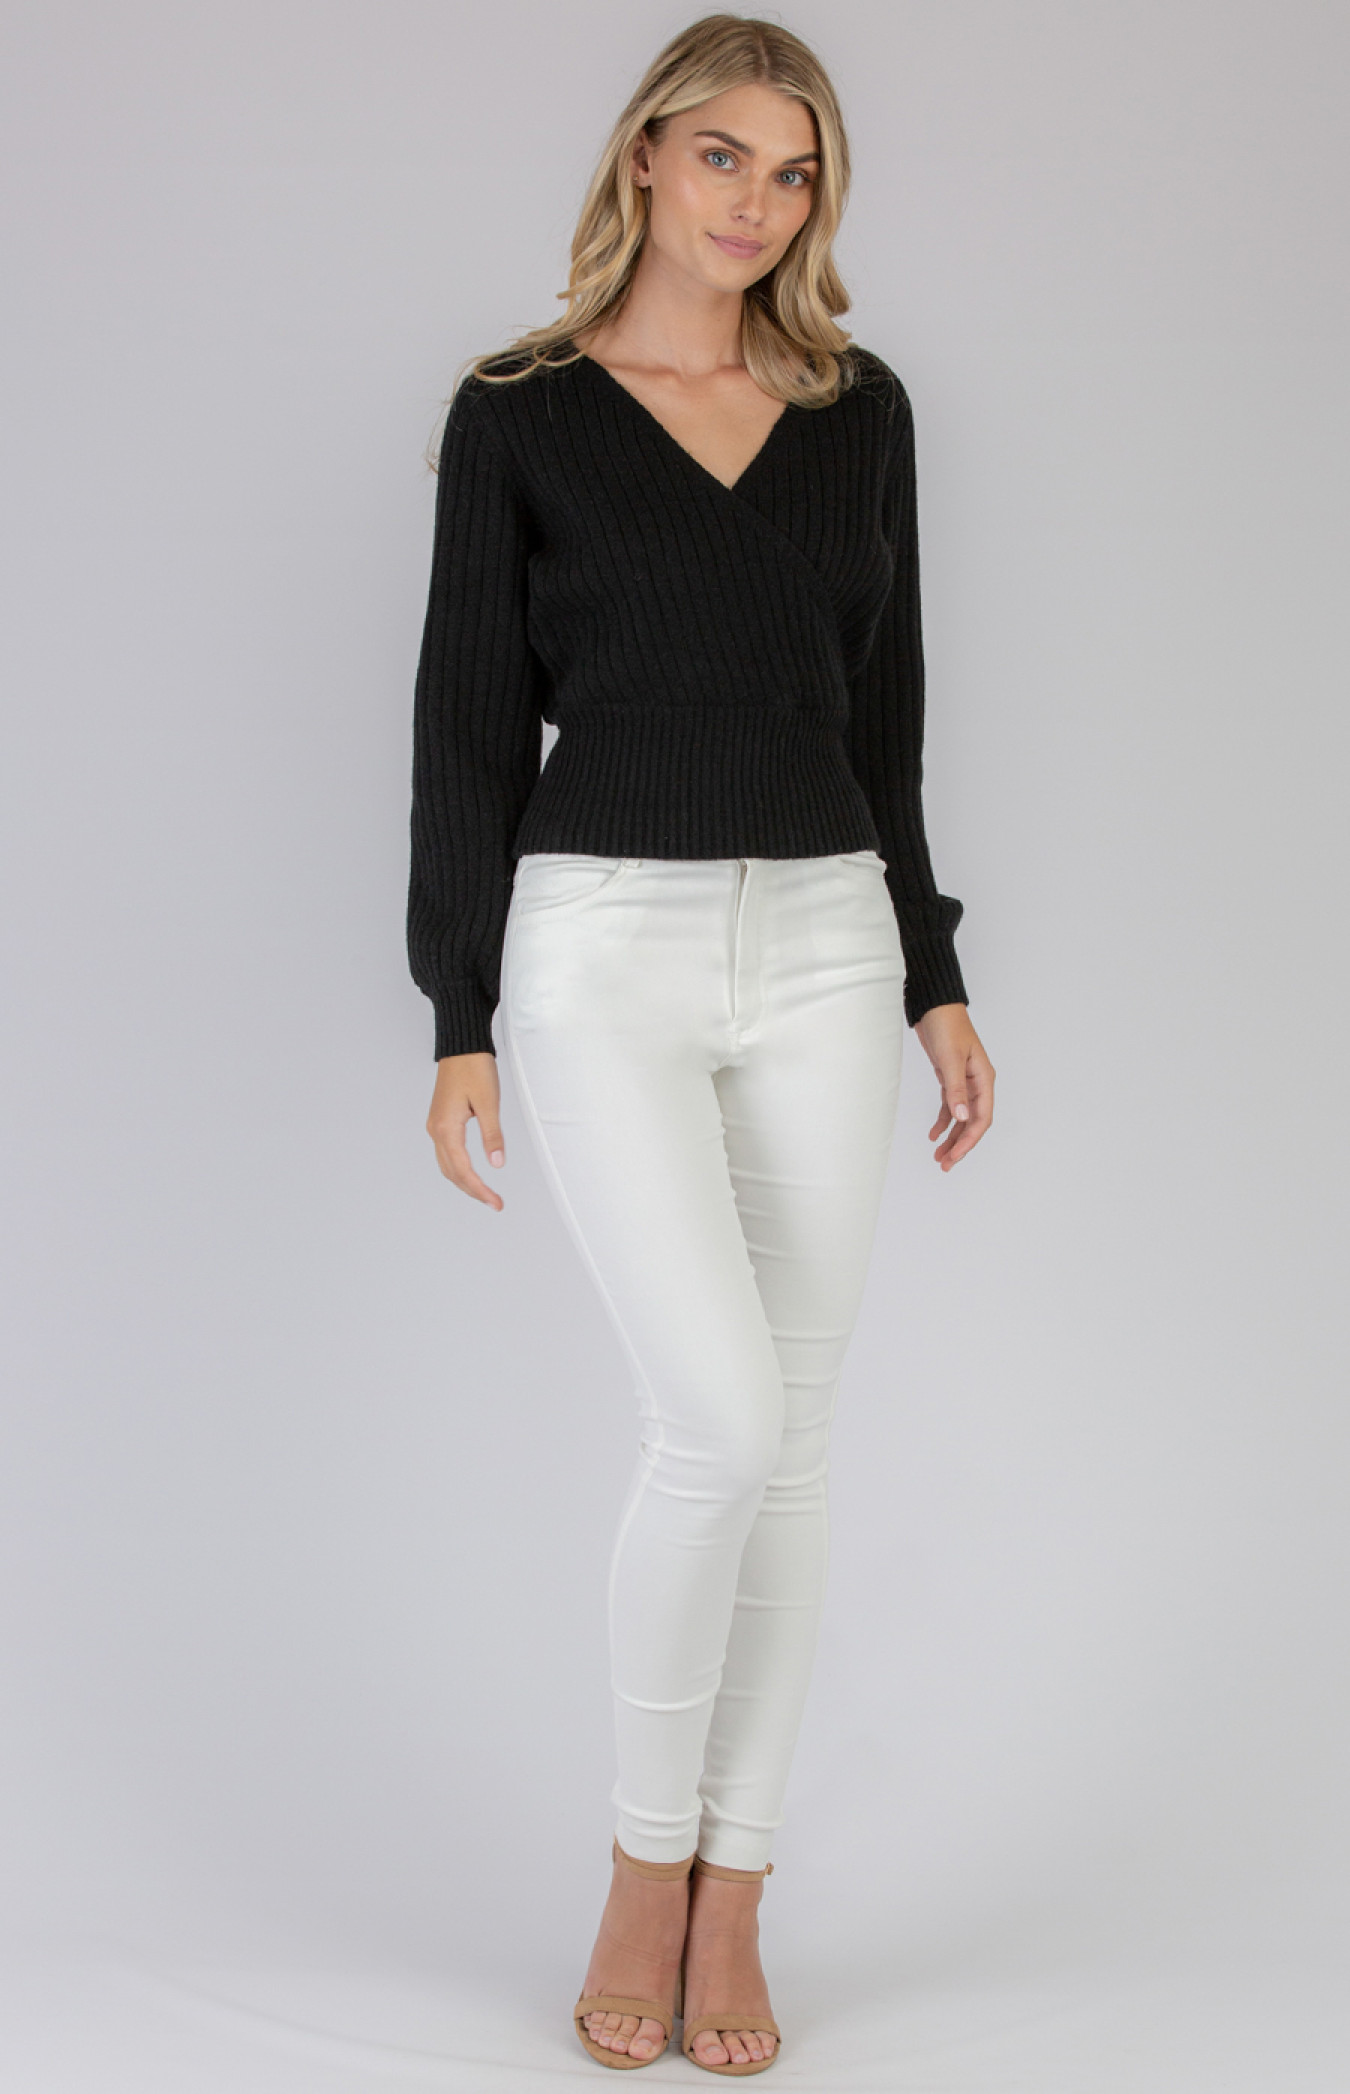 Textured Cross Front Knit Top with Belt (SKN350) | Style State